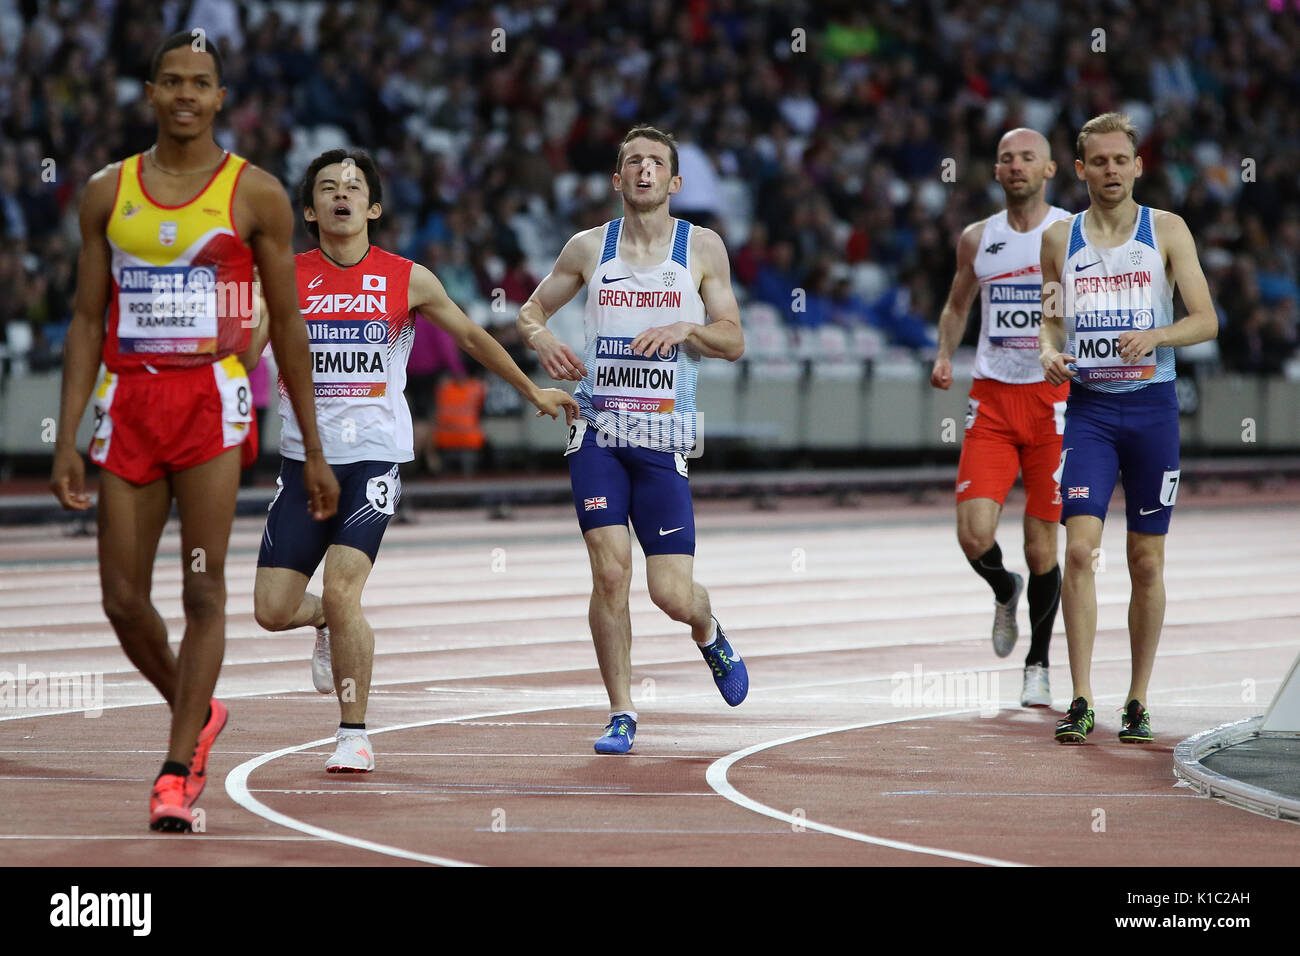 James HAMILTON of Great Britain in the Men's 800 m T20 Final at the World Para Championships in London 2017 Stock Photo